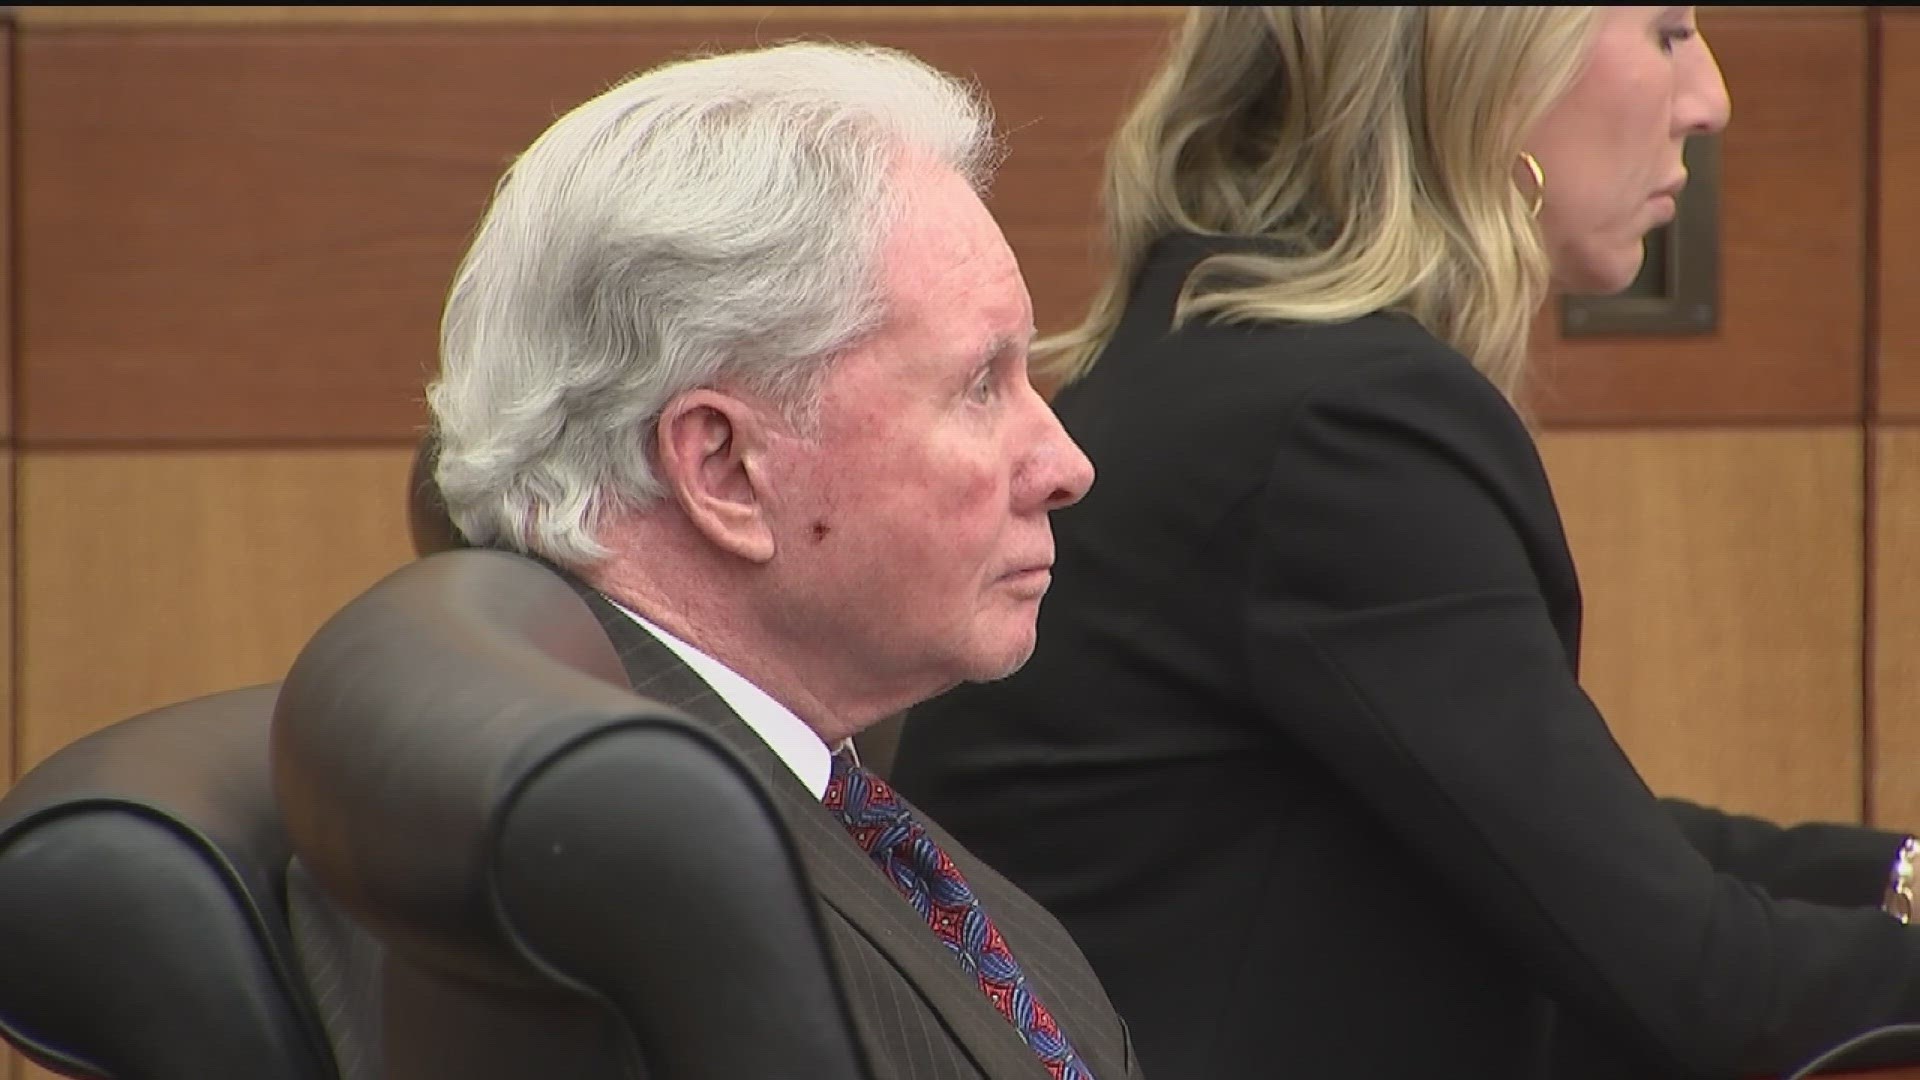 Judge Robert C.I. McBurney issued an order Tuesday precluding prosecutors from arguing McIver intended to kill his wife in 2018.